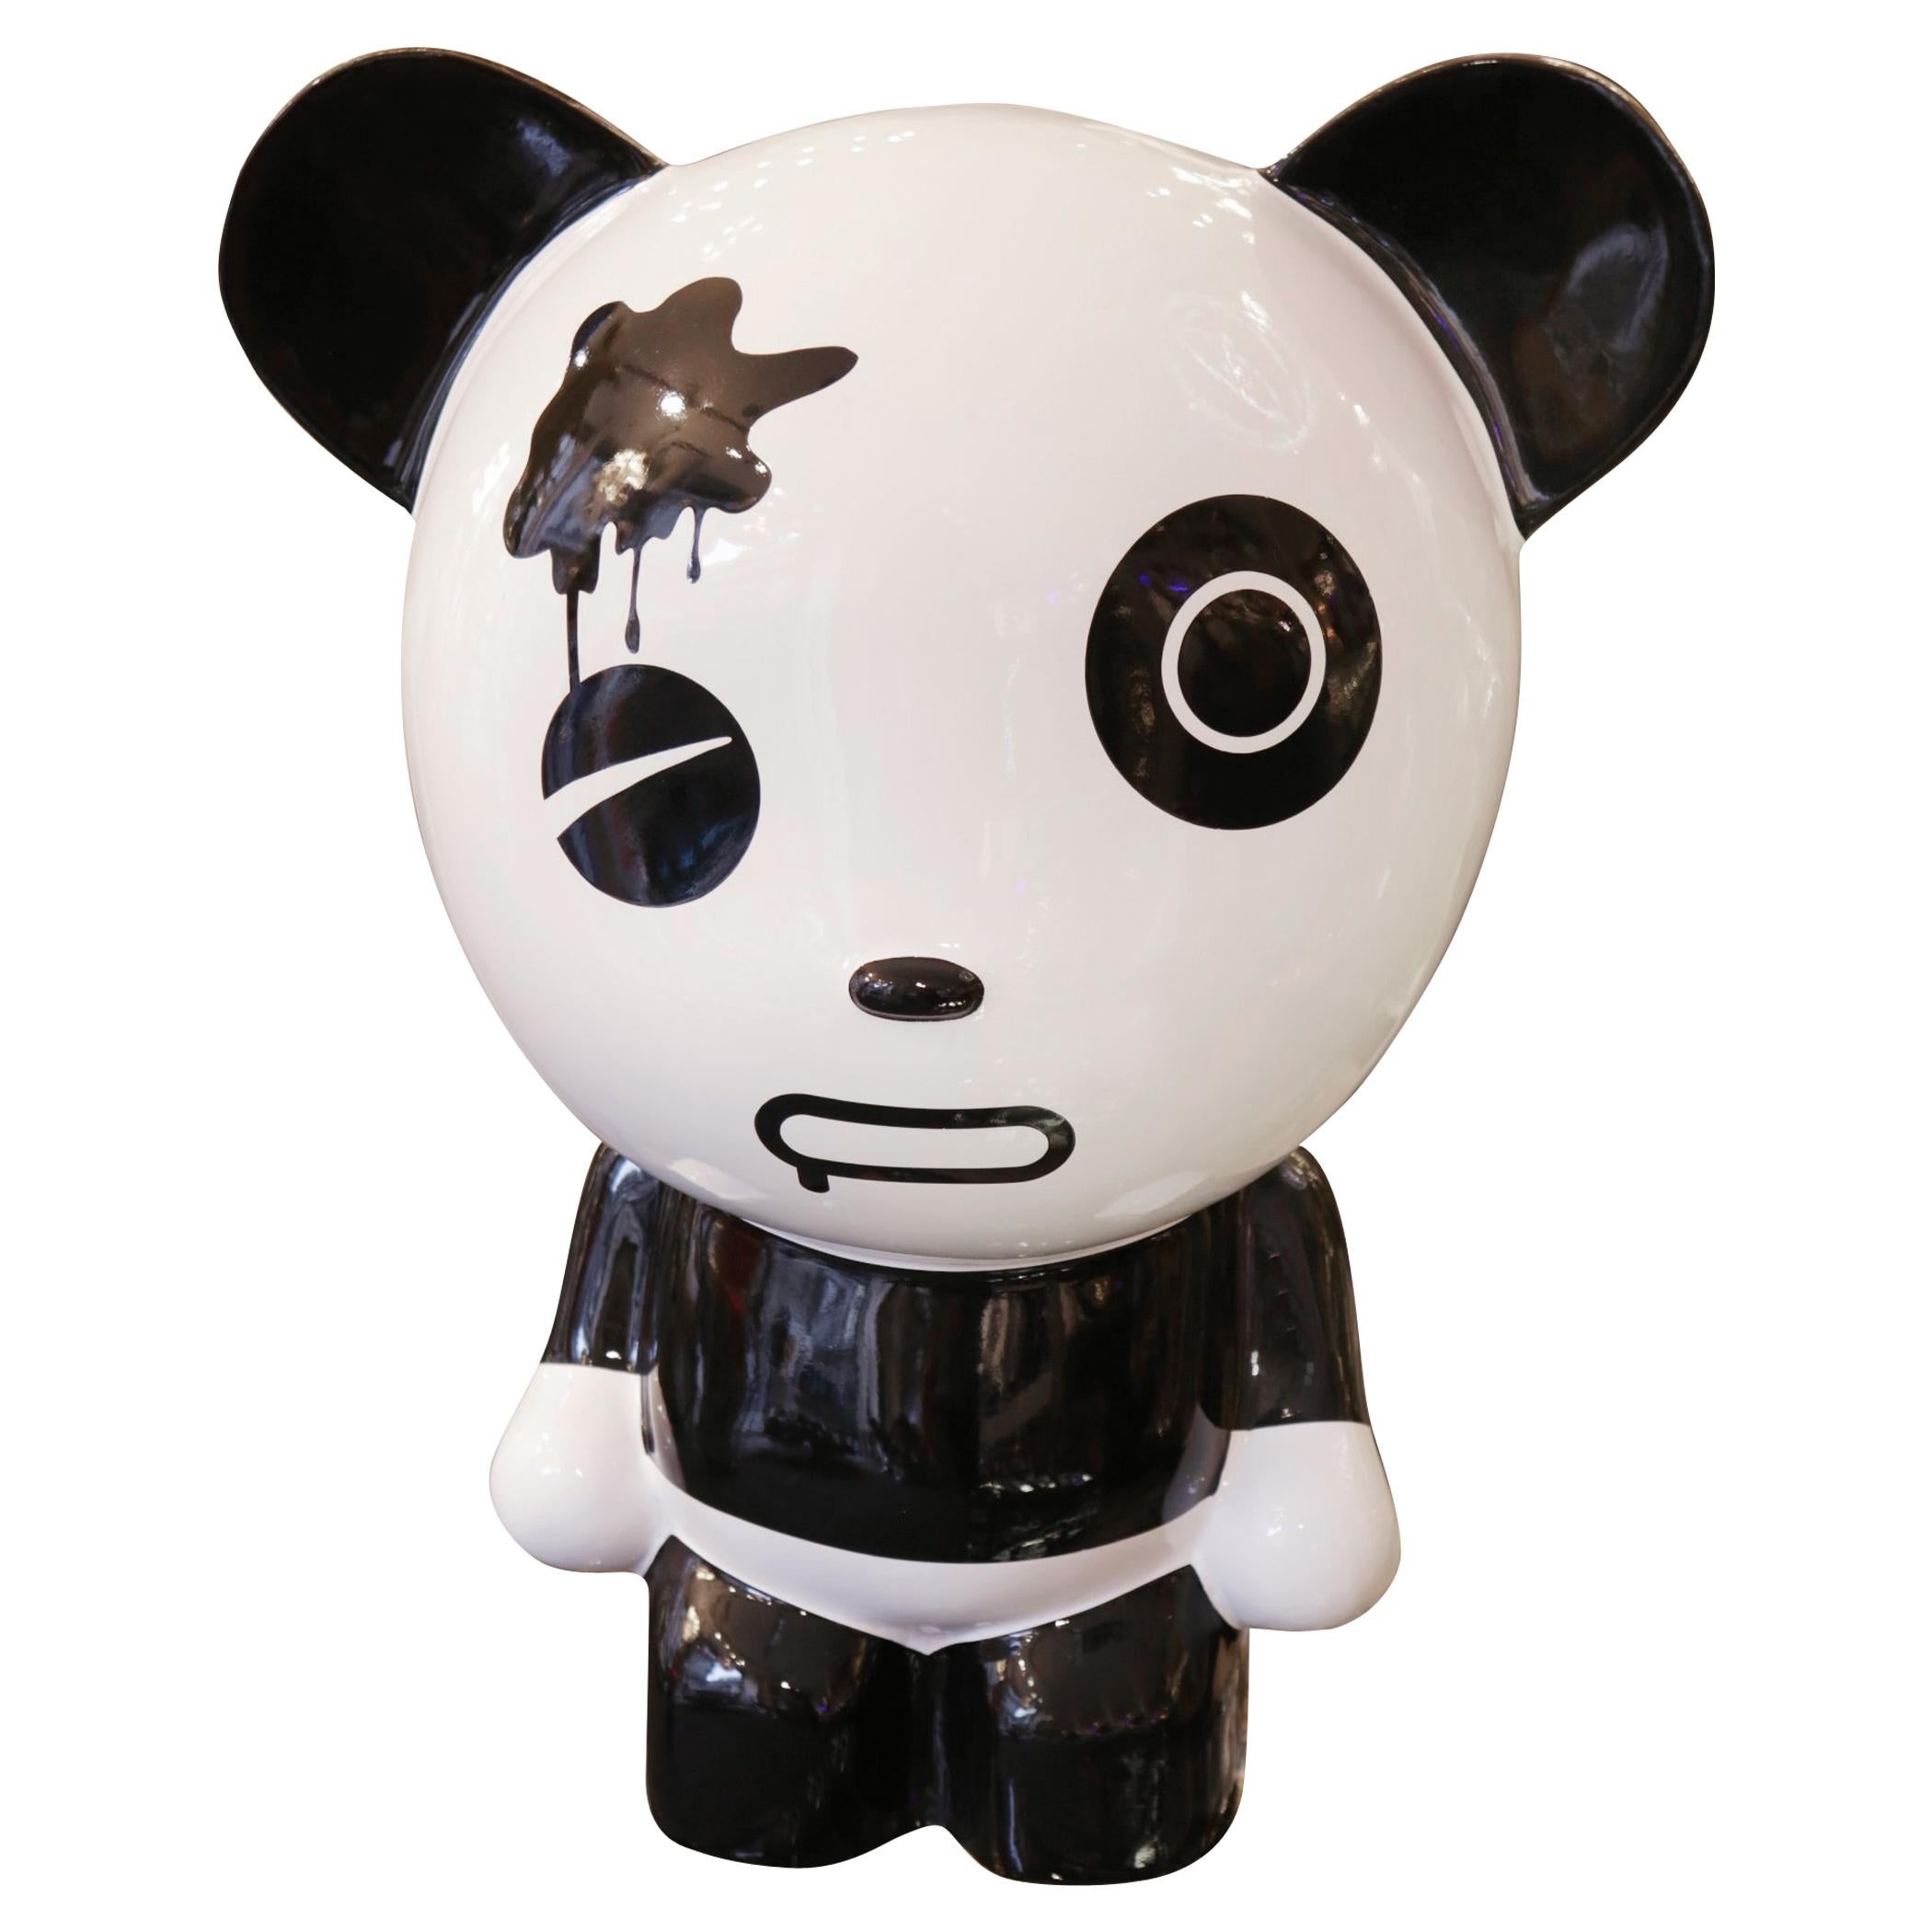 Wounded Panda Sculpture by Jiji